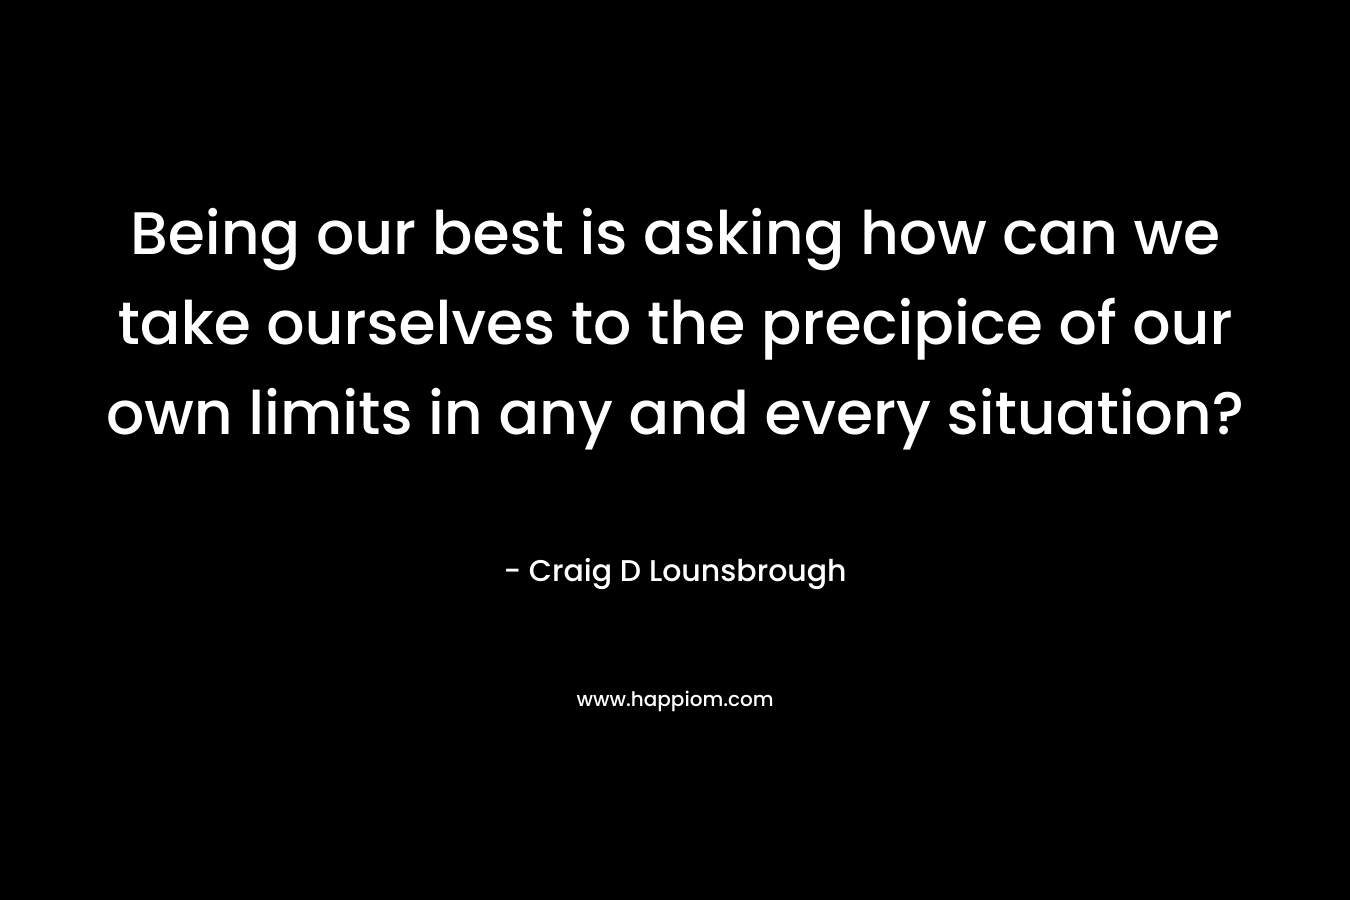 Being our best is asking how can we take ourselves to the precipice of our own limits in any and every situation? – Craig D Lounsbrough